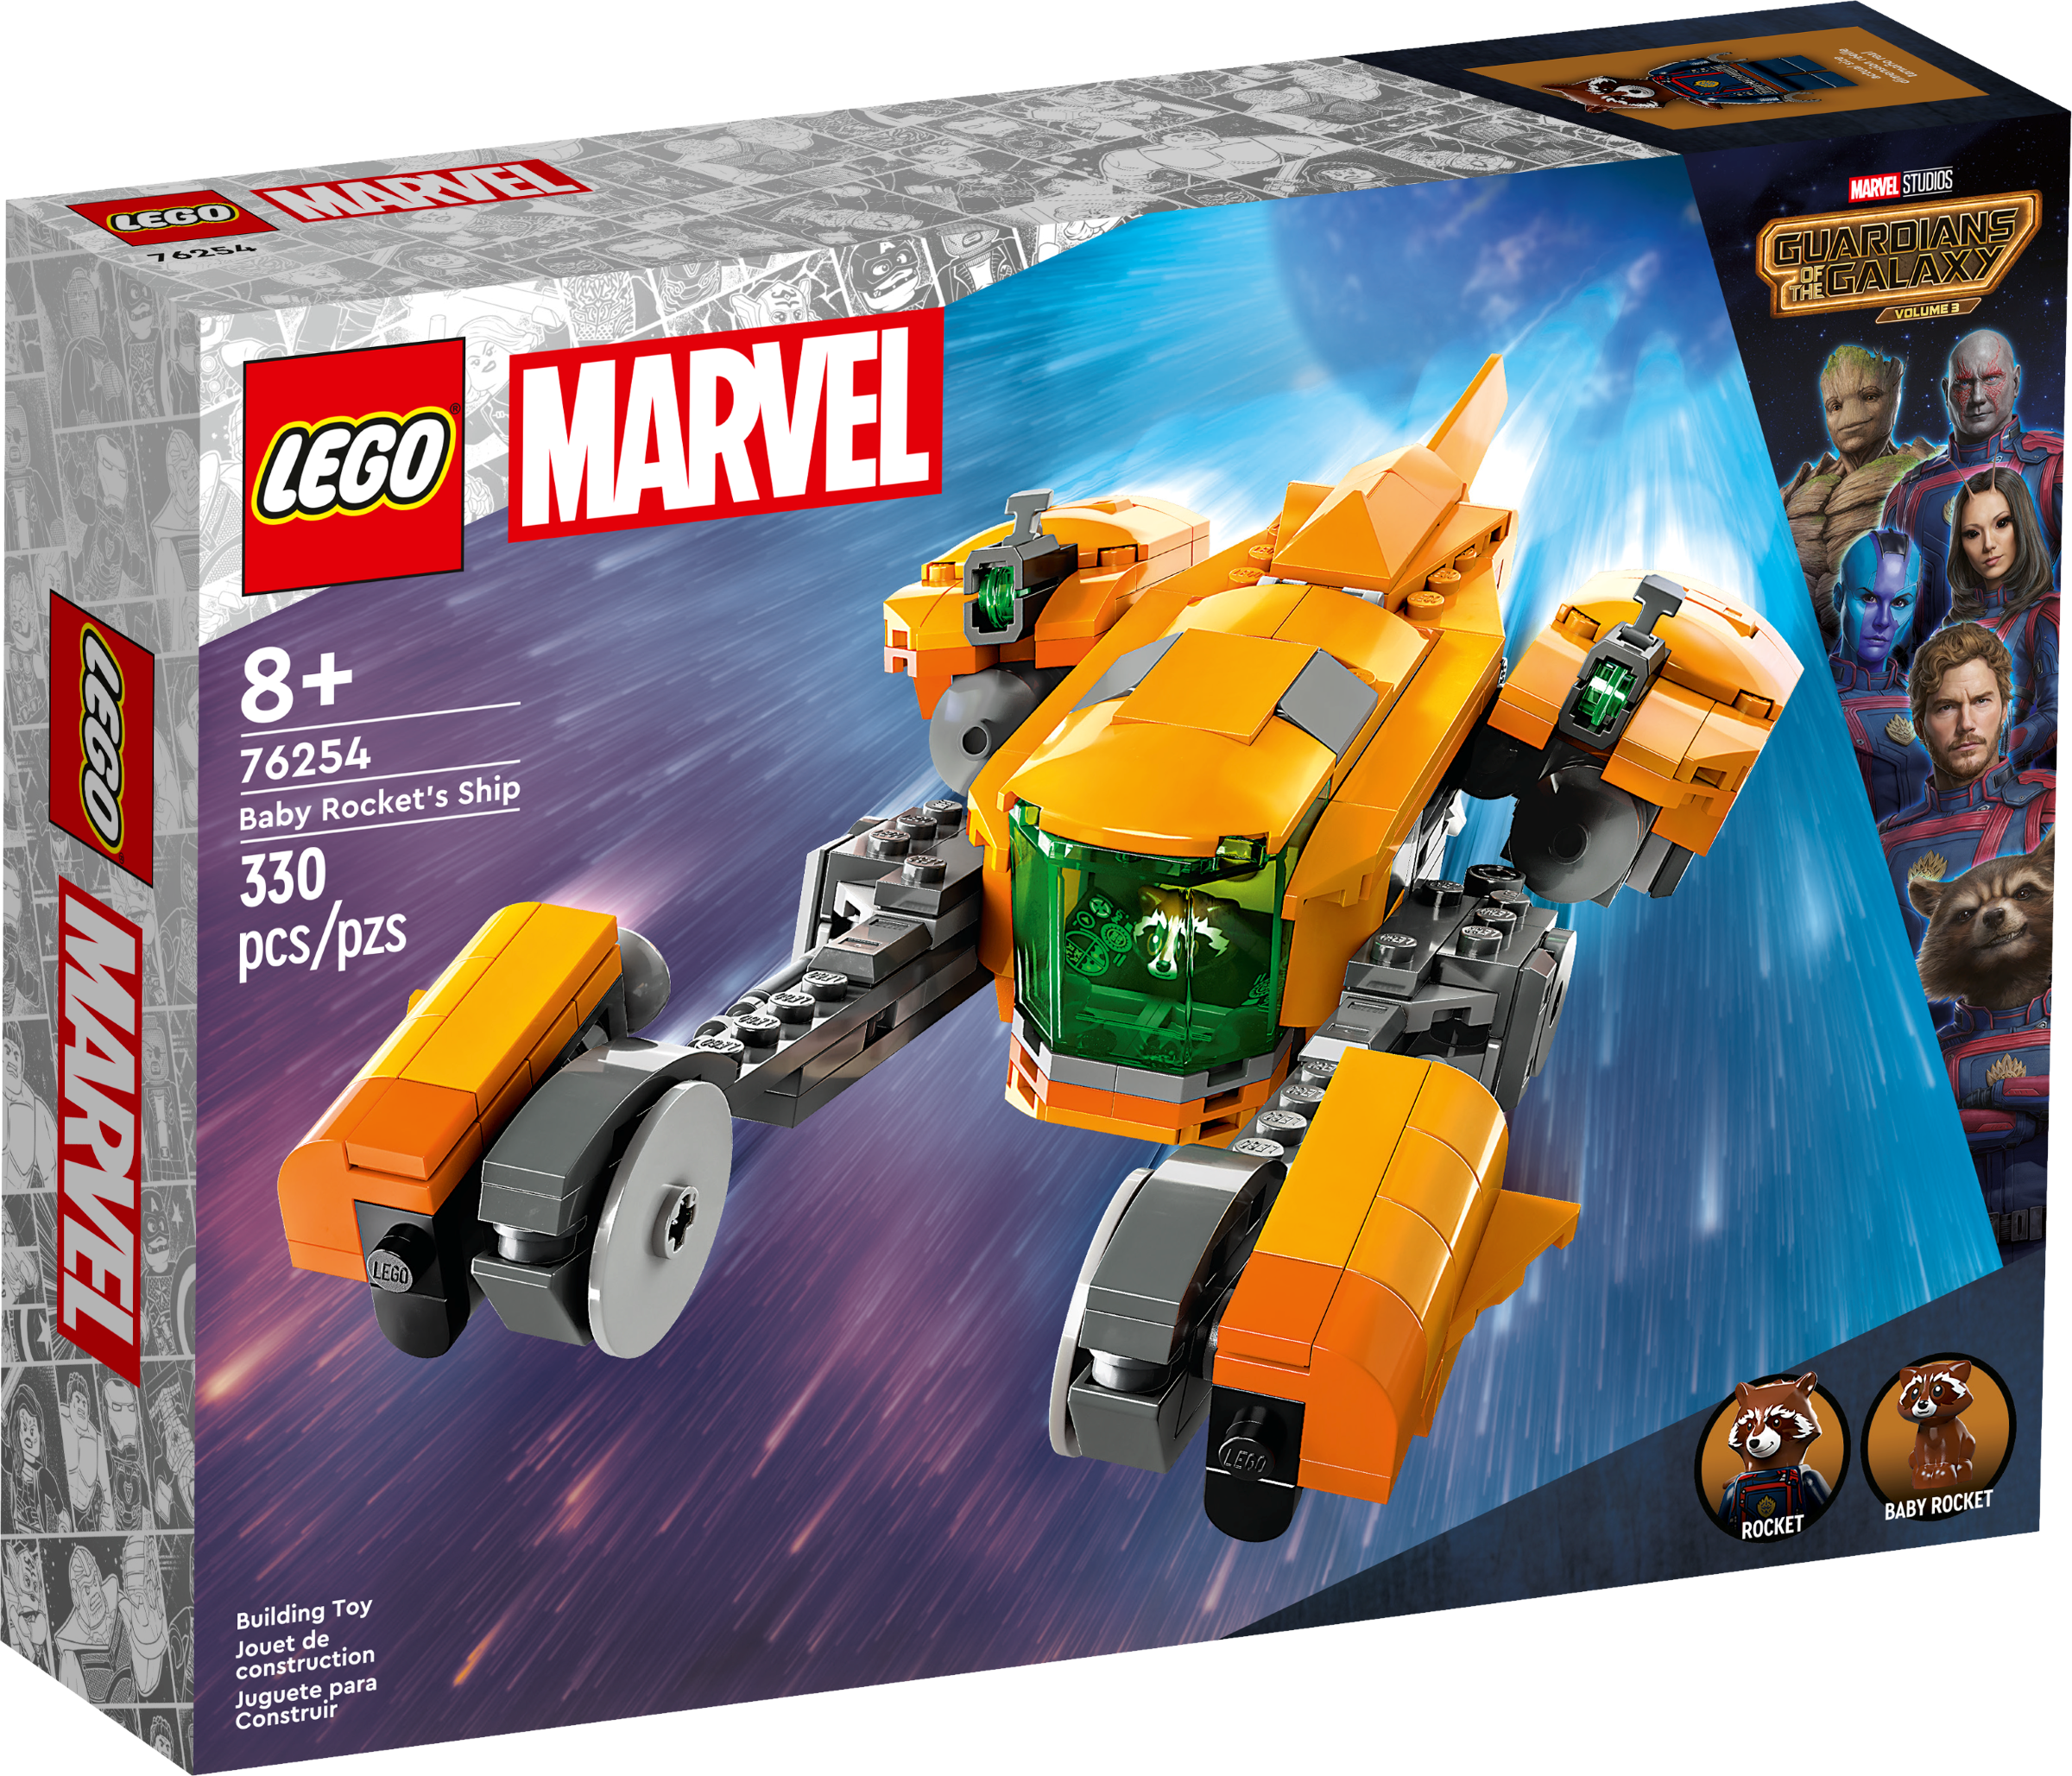 Toys & Sets | Official LEGO® GB